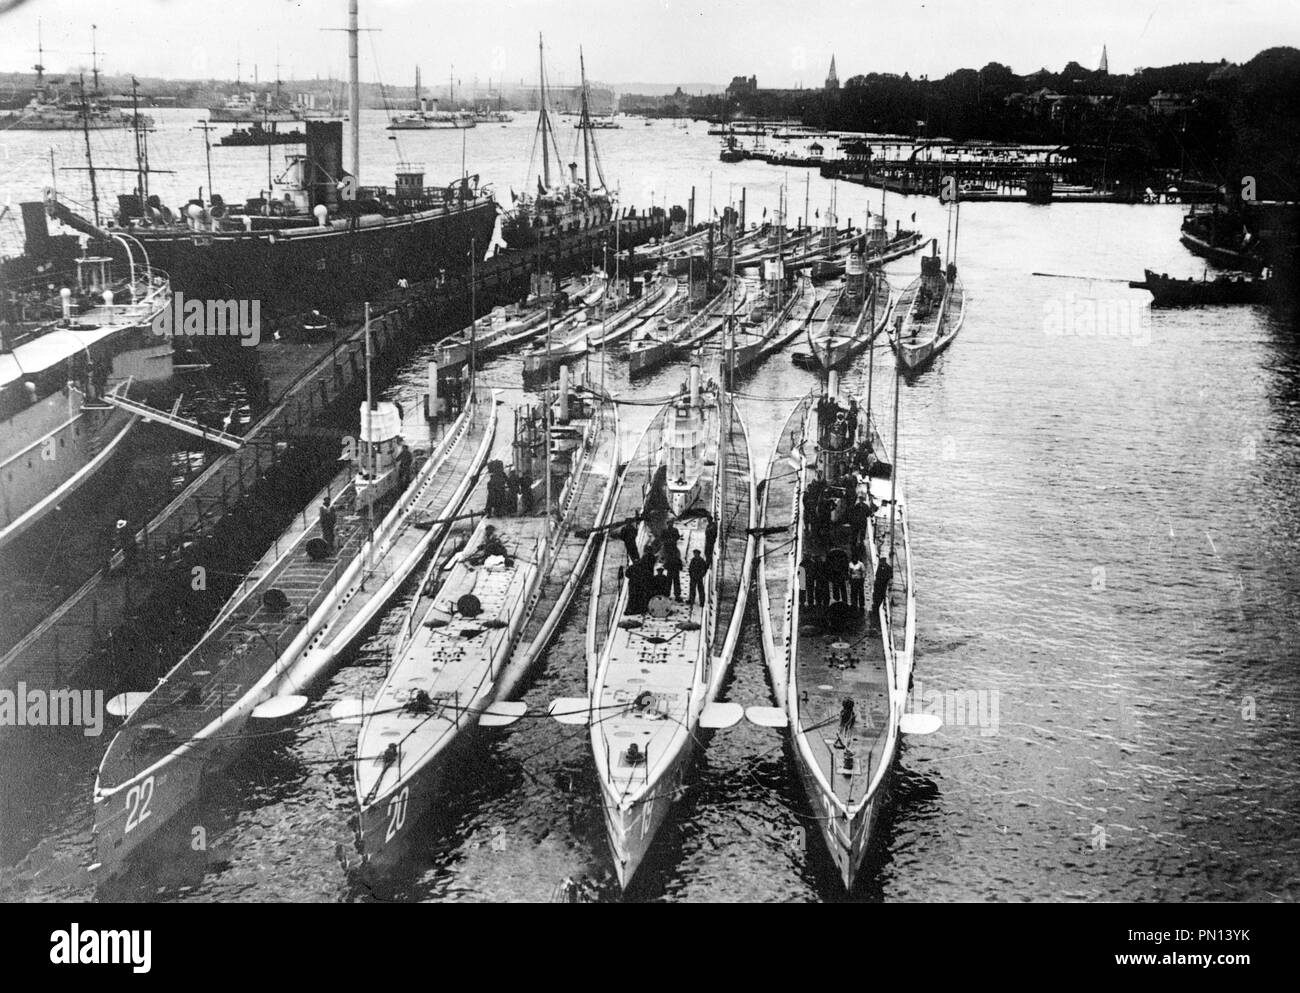 German Submarines in harbor. German submarines in a harbour. Front row (left to right): U-22, U-20 (sank the Lusitania), U-19 and U-21. Back row (left to right): U-14, U-10 and U-12 Stock Photo